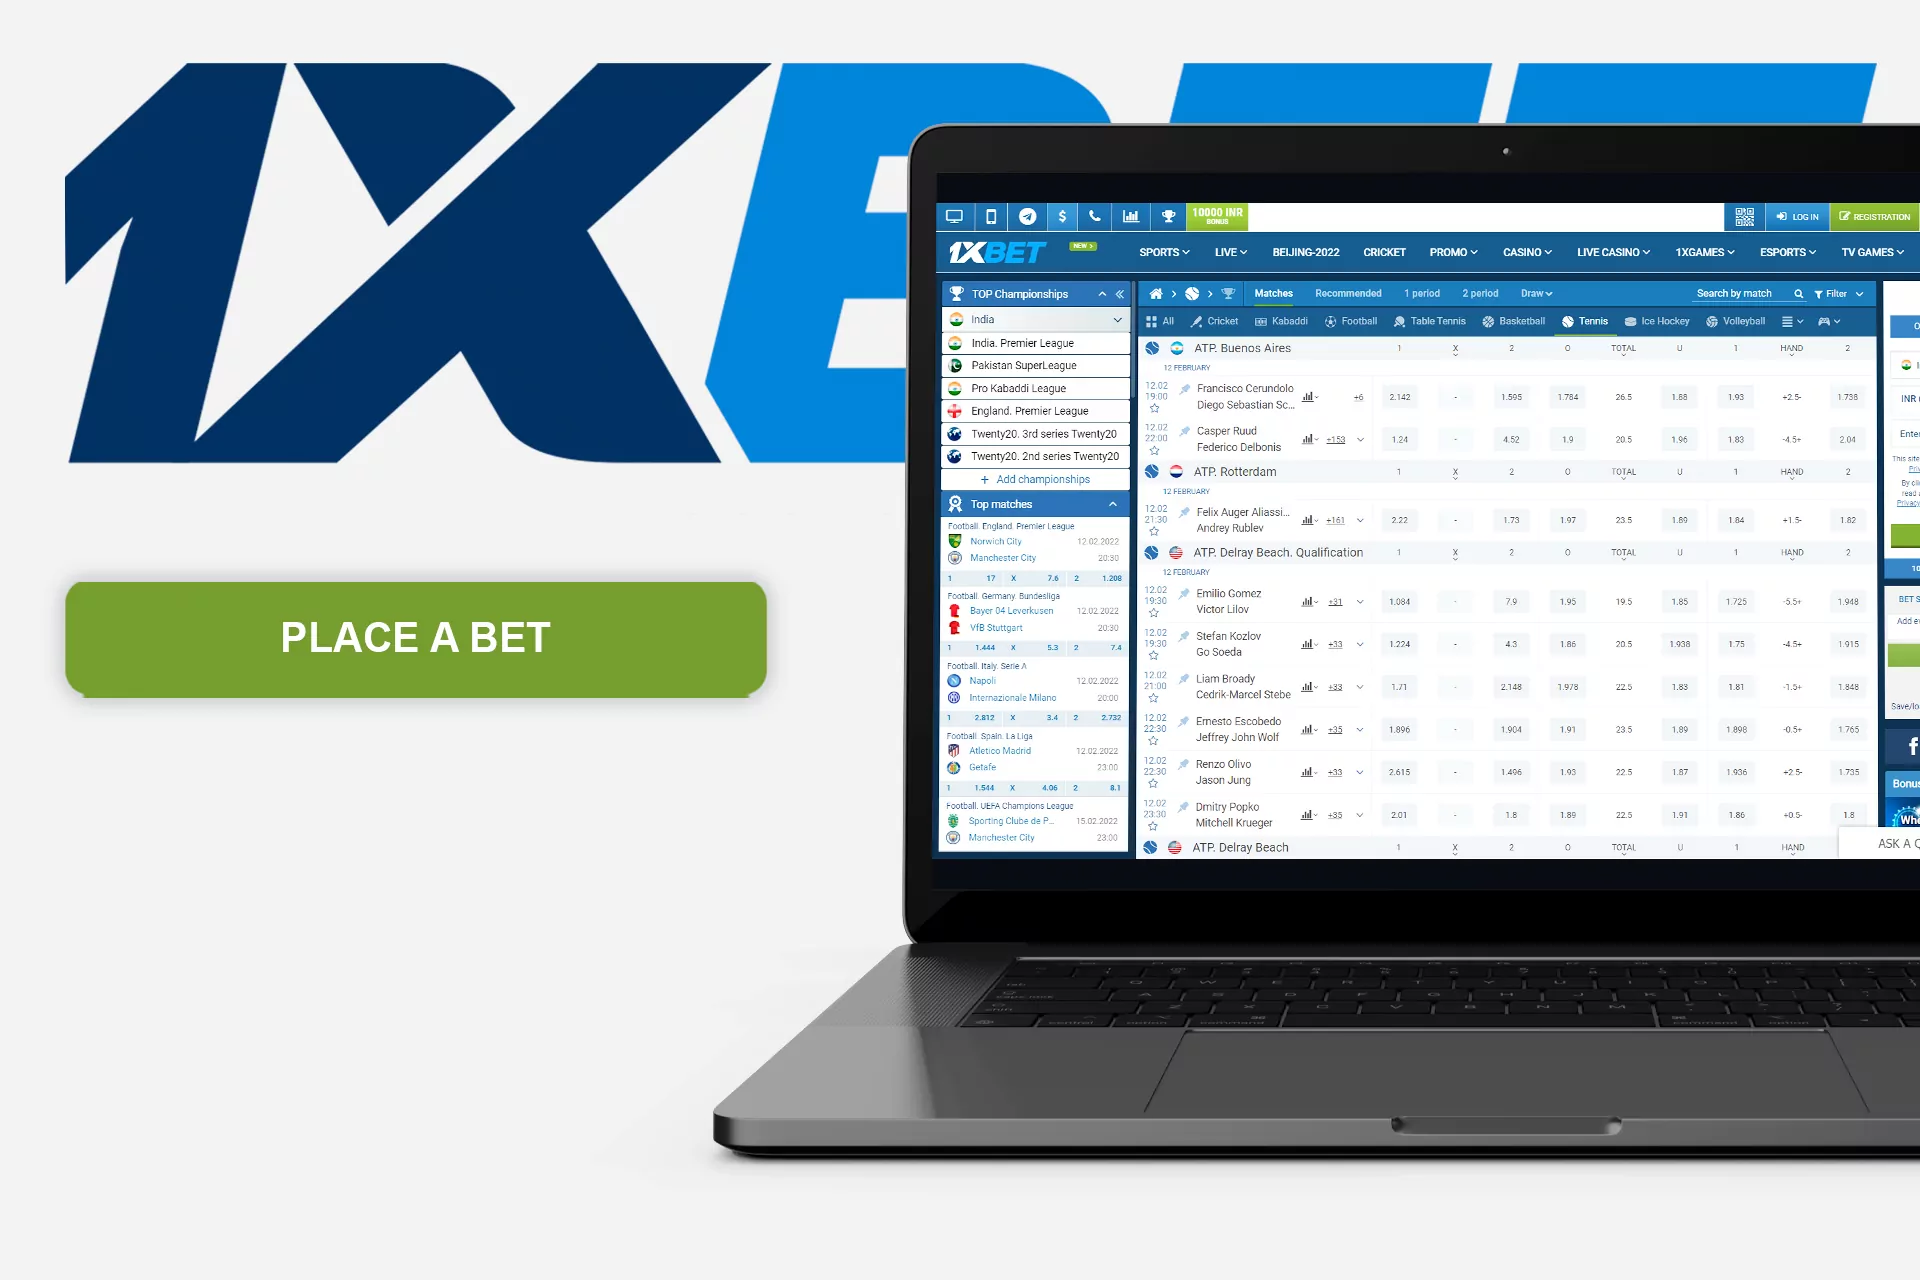 To start placing bets on tennis, sign up or log in to 1xBet.